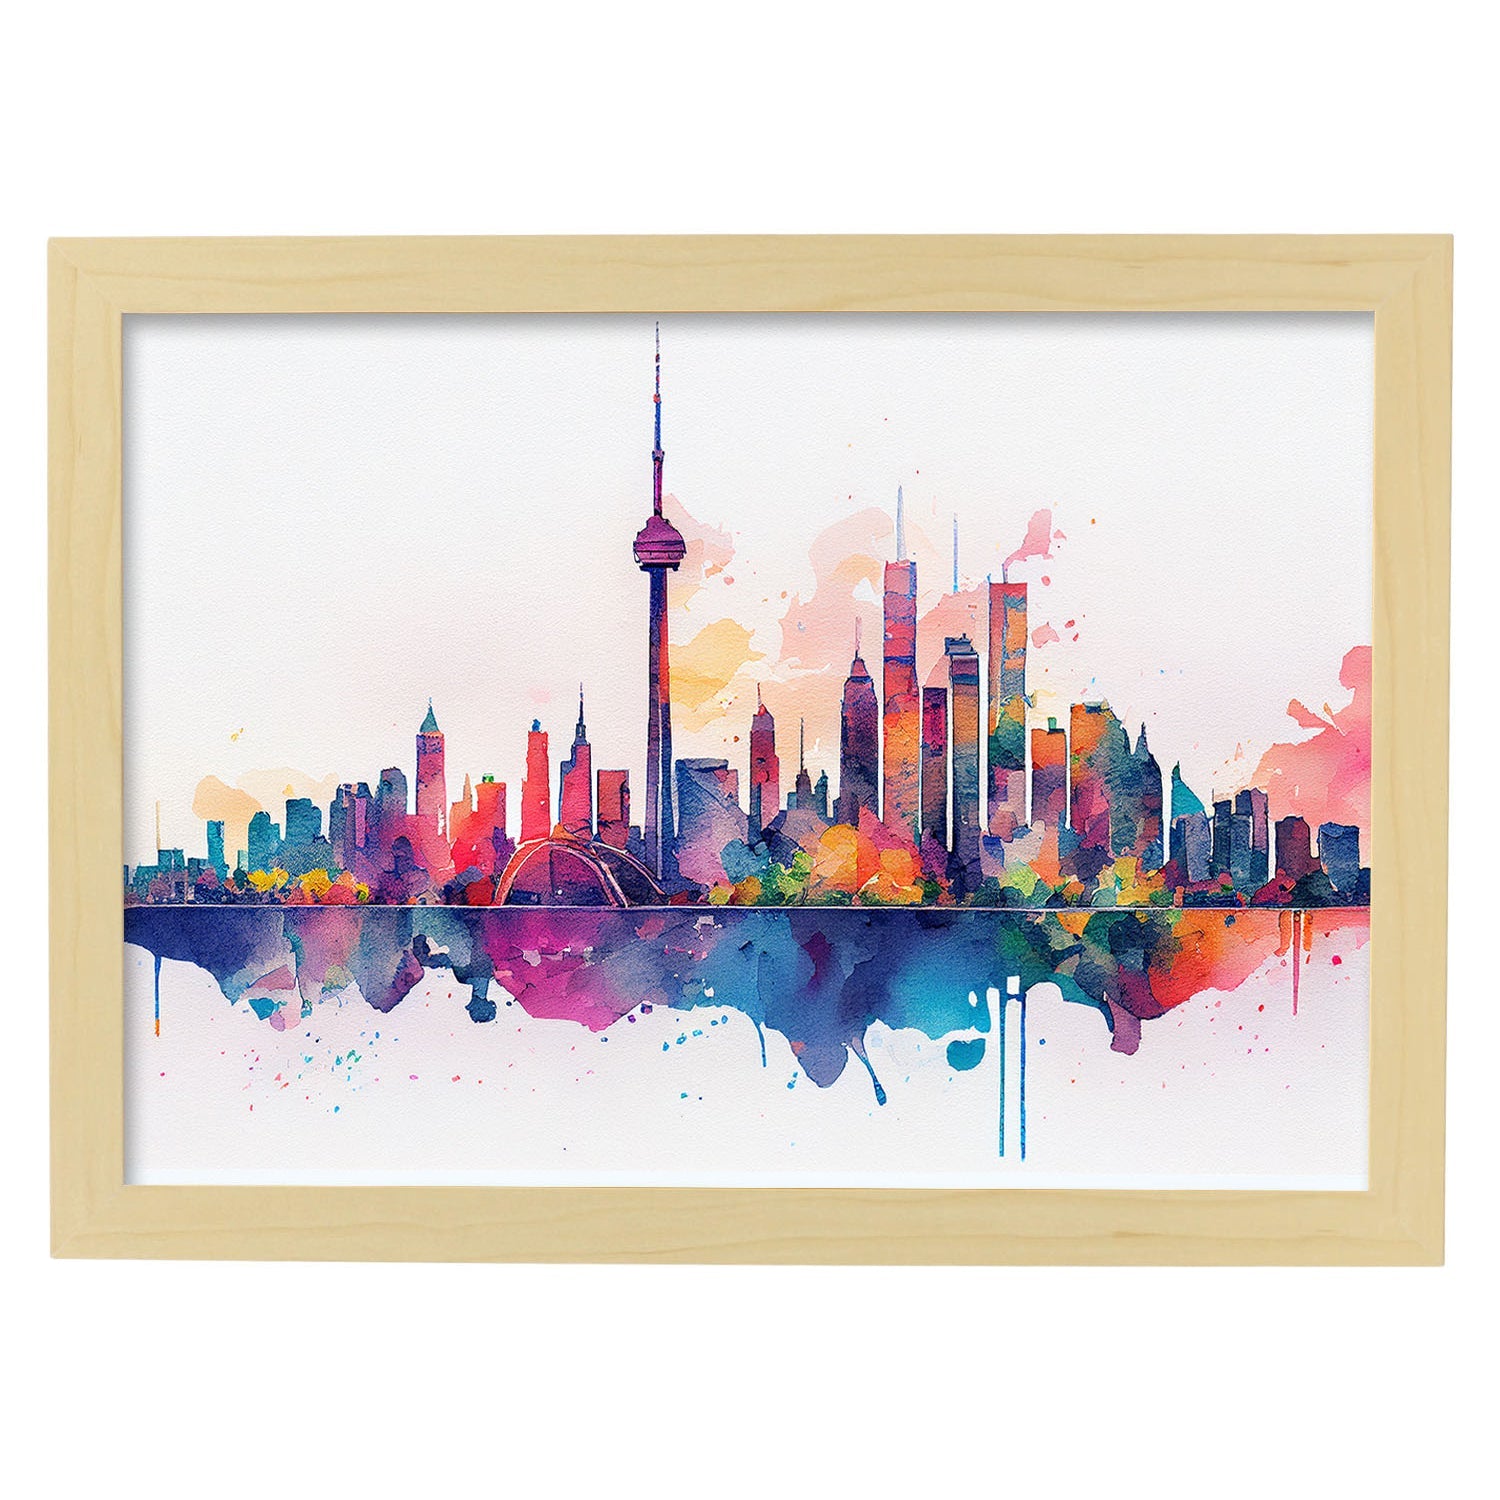 Nacnic watercolor of a skyline of the city of Toronto_1. Aesthetic Wall Art Prints for Bedroom or Living Room Design.-Artwork-Nacnic-A4-Marco Madera Clara-Nacnic Estudio SL